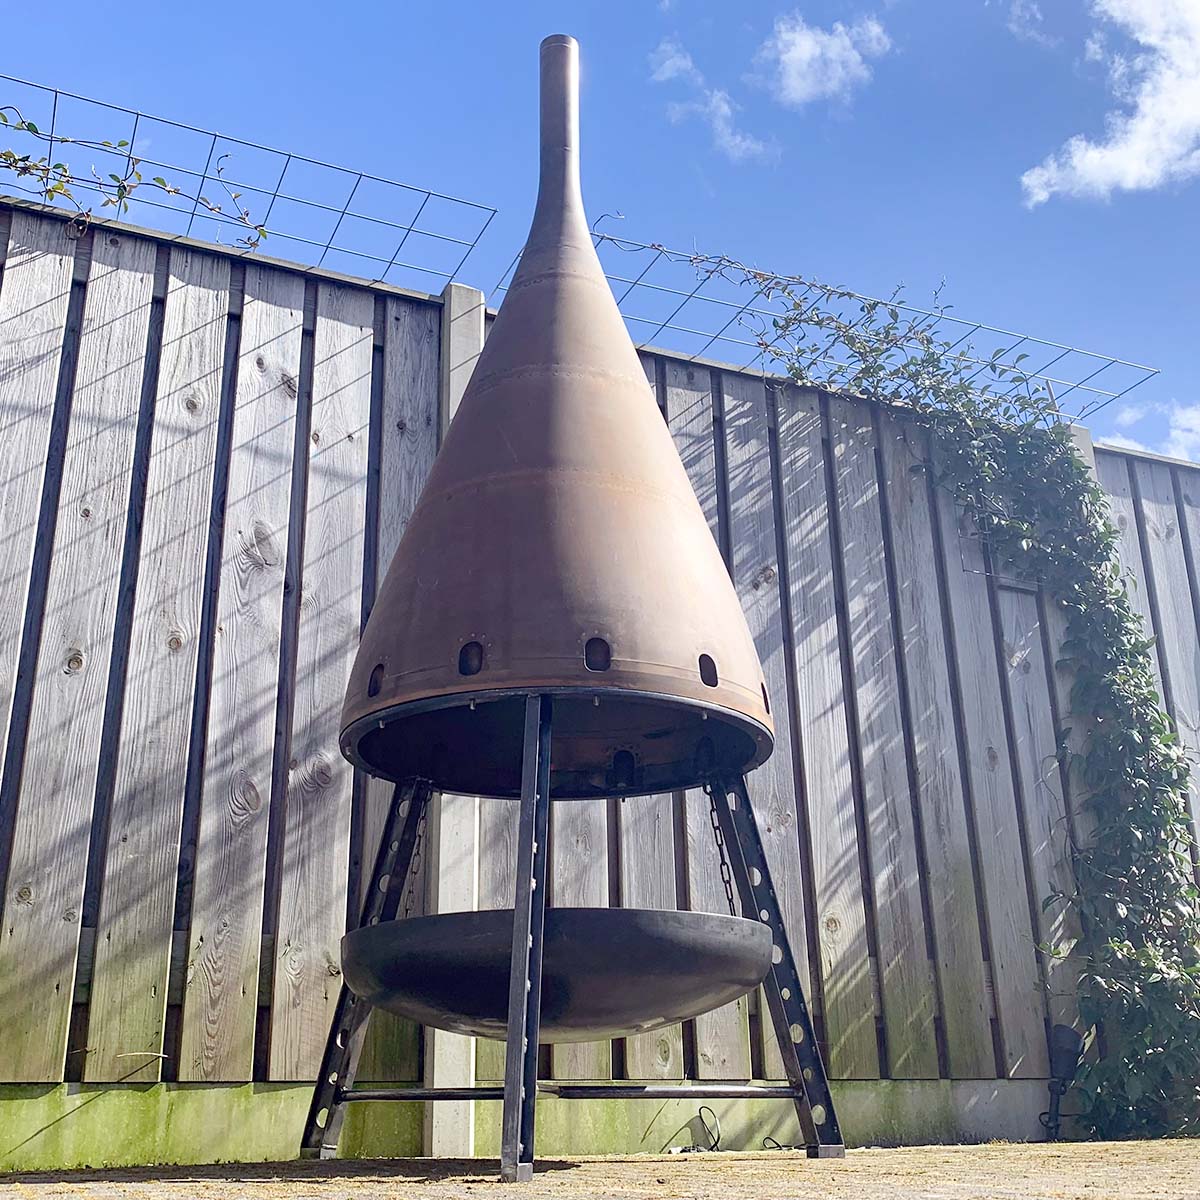 Outdoor fireplace made from an exhaust cone of a Kuwait Airways Boeing 747.